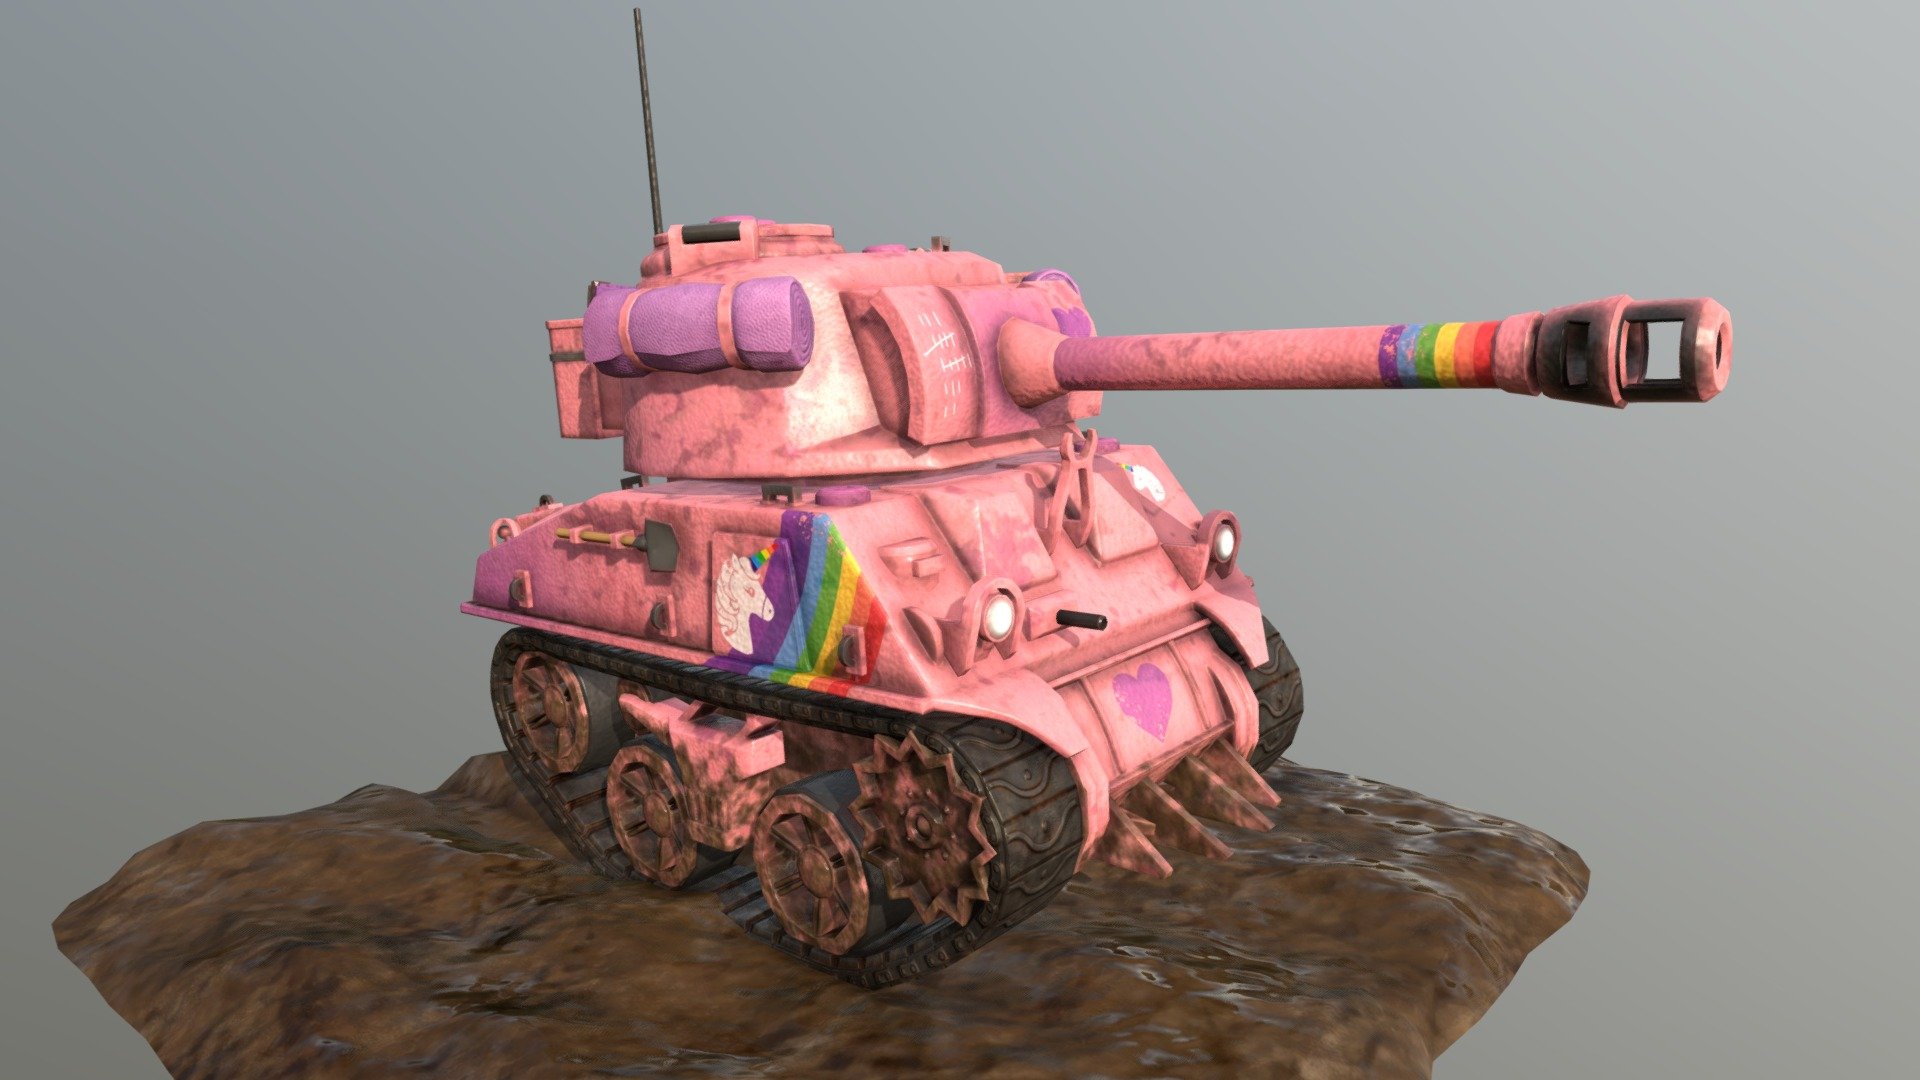 A WW2 chubby UNICORN tank! Based on a Sherman Tank. Included:





GAME READY MESH! Clean, Light Topology! (Polys just Tank = 7,265)




In a hierachy ready to animate! Also comes with a seperate animation (FBX format).




Tank Tracks and Mud are textured with vertical tiling to allow UV animation!




Neatly Unwrapped with clear UVW islands!




FBX and OBJ formats.




Includes all textures in PNG format. Tank and Mud. (Diffuse, Normal, Self-Illumination, Roughness, Metal.)




ALSO INCLUDES Diffuse texture WITHOUT markings, making it easy for you to add you own! Also includes the UVW layout as PNG to make adding your own markings even easier!



**BONUS: Includes the Diffuse texture for the ‘Chubby Tank’! You can see here:
https://skfb.ly/6GvzA

Please send me suggestions or requests for other models! - Chubby Unicorn Tank - GAME READY - Buy Royalty Free 3D model by James Fraser (@jamesfraser) 3d model